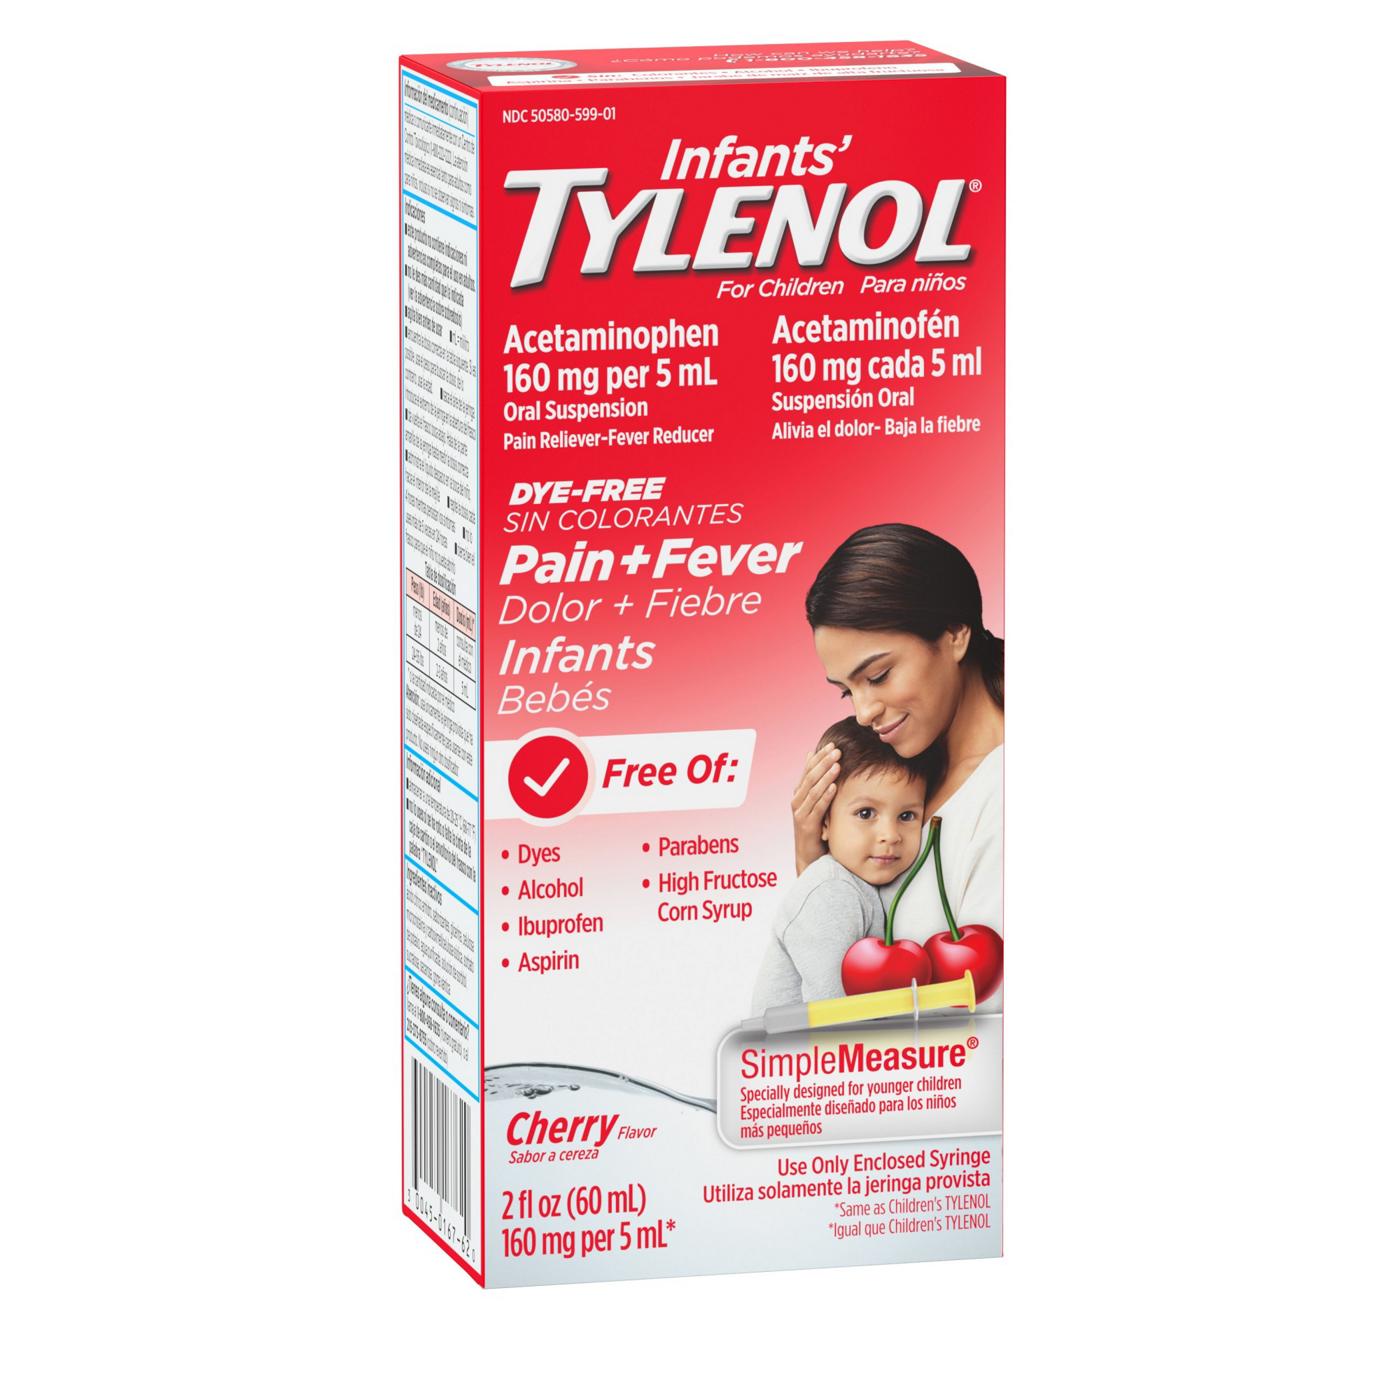 Tylenol Infants' Pain + Fever Oral Suspension - Cherry; image 5 of 6